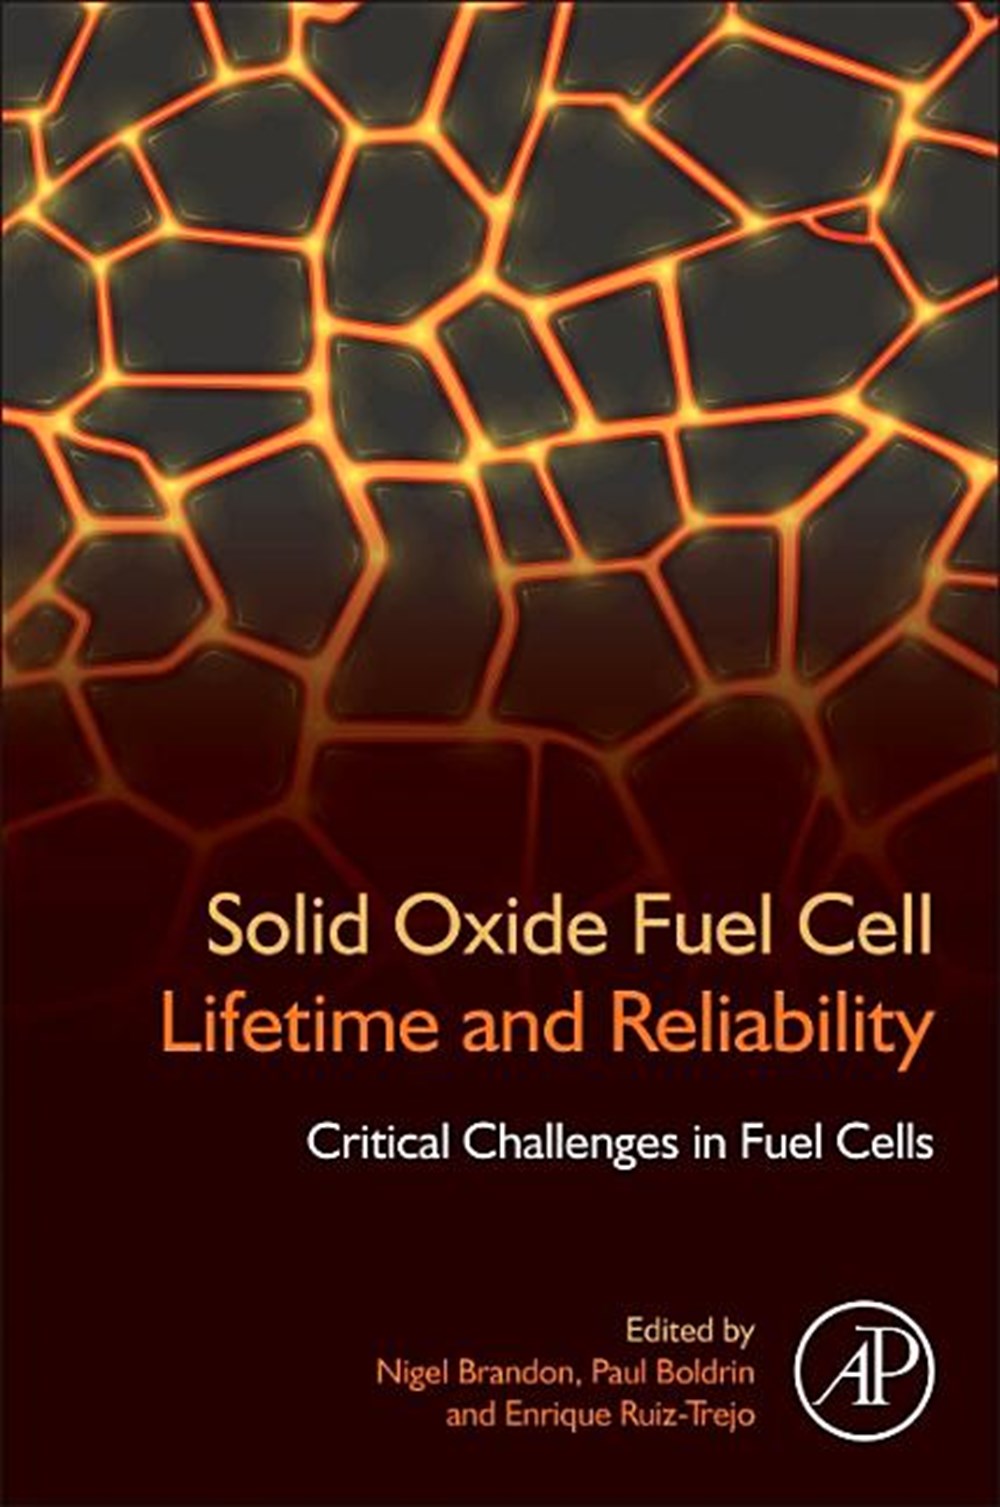 Solid Oxide Fuel Cell Lifetime and Reliability: Critical Challenges in Fuel Cells